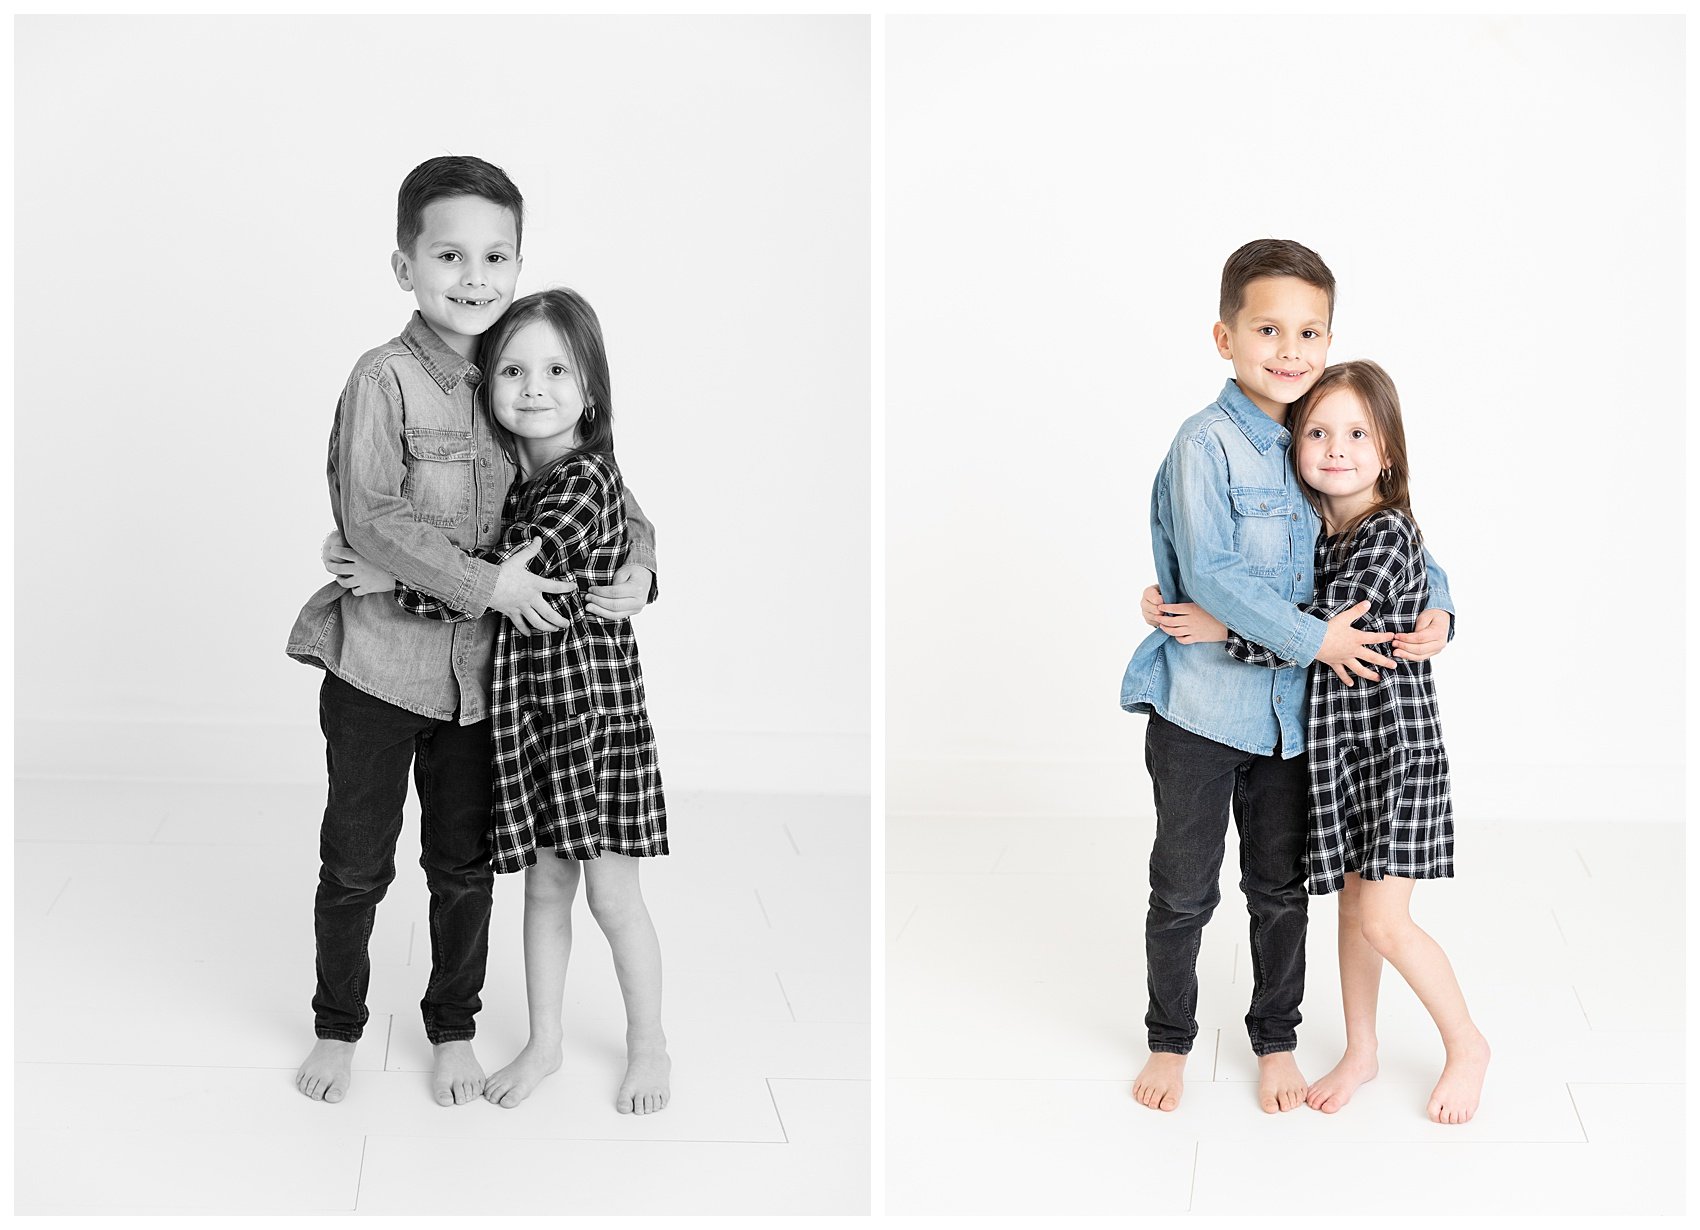 Session in all white studio in Draper, Utah. adorable sibling session photographed by Stephanie Lorraine Photography.